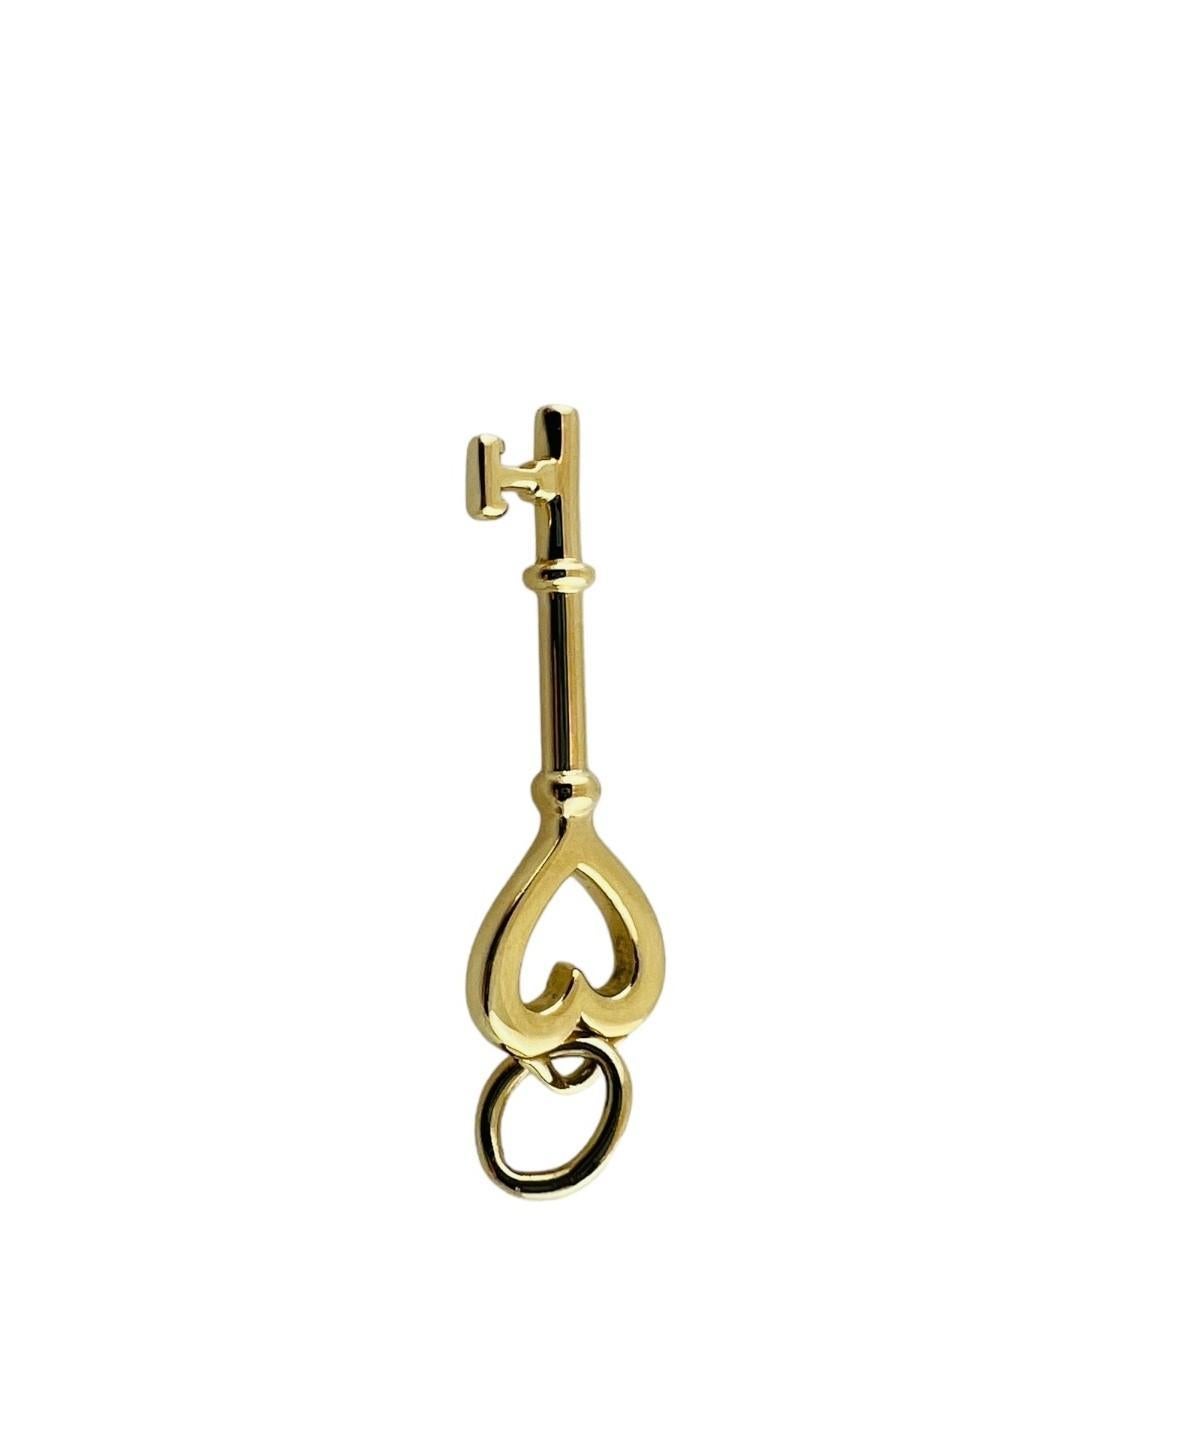 Tiffany & Co. 18K Yellow Gold Heart Key Pendant

This lovely heart key pendant by Tiffany is set in 18K yellow gold

The petite pendant measures approx. 28mm in length and 9 mm wide. 

Hangs approx. 31 mm with loop

Stamped T & Co. 750

1.4 dwt /